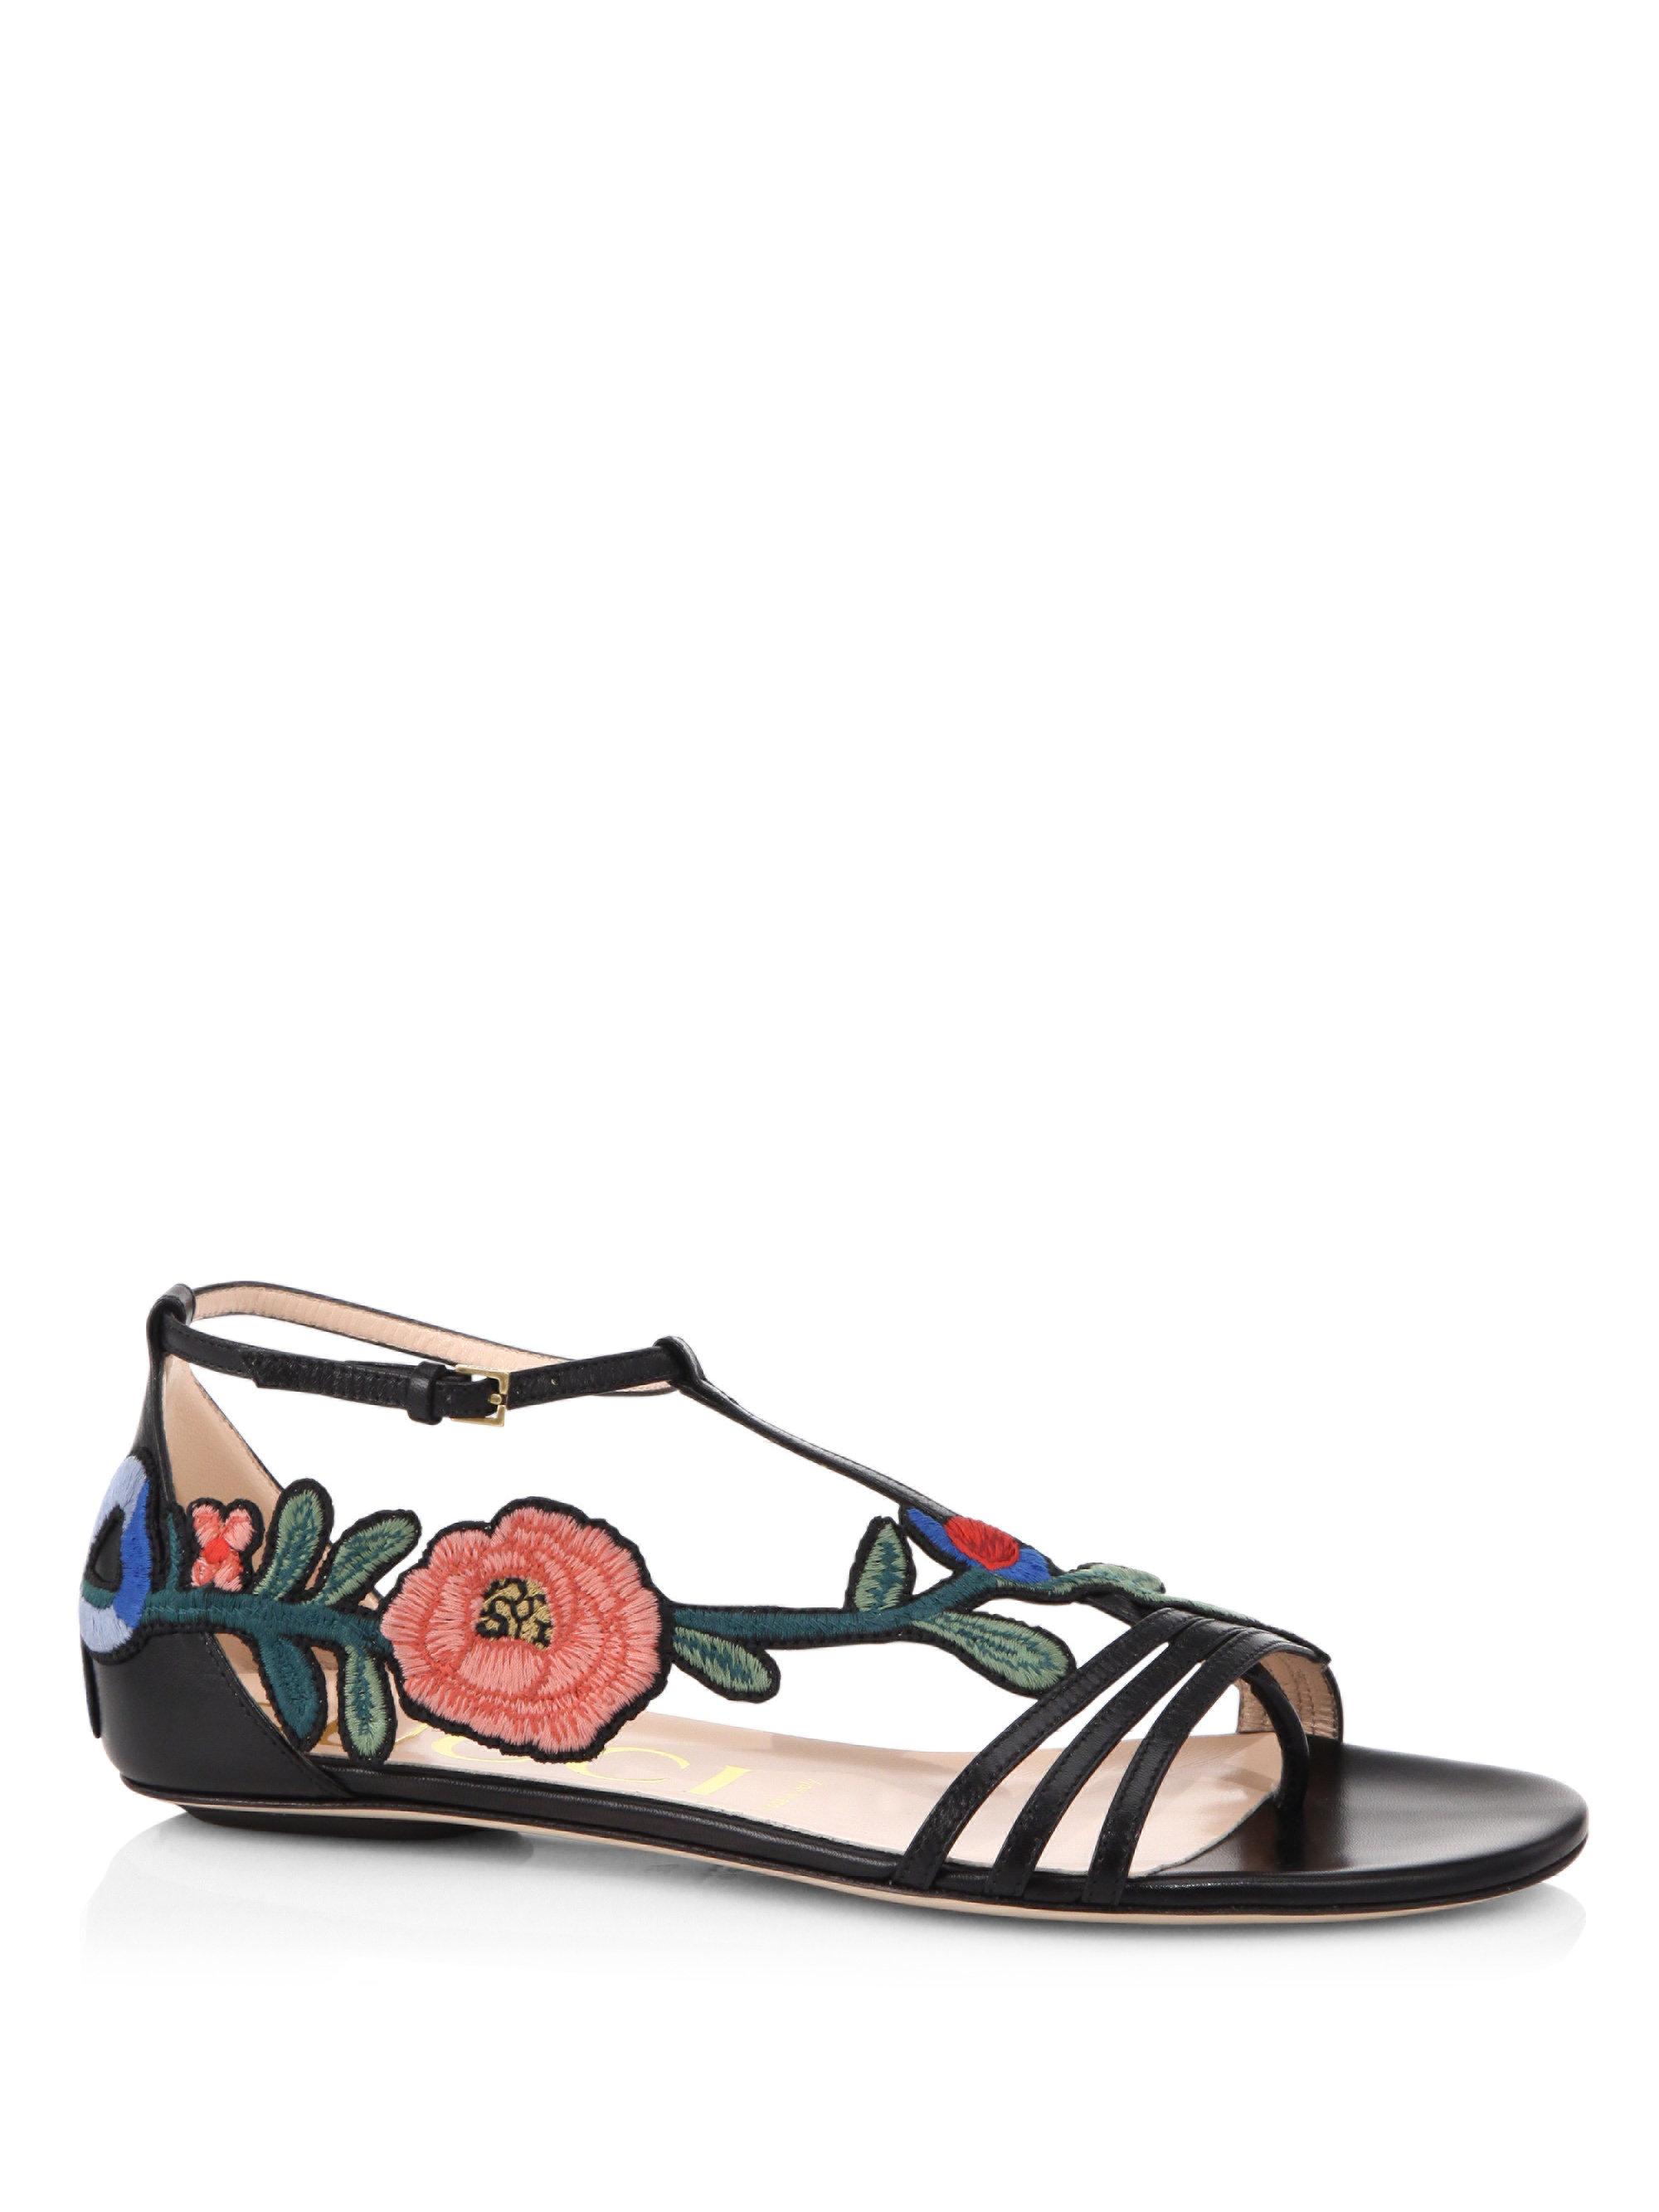 Gucci Leather Ophelia Floral-embroidered Flat Sandals in Black - Lyst